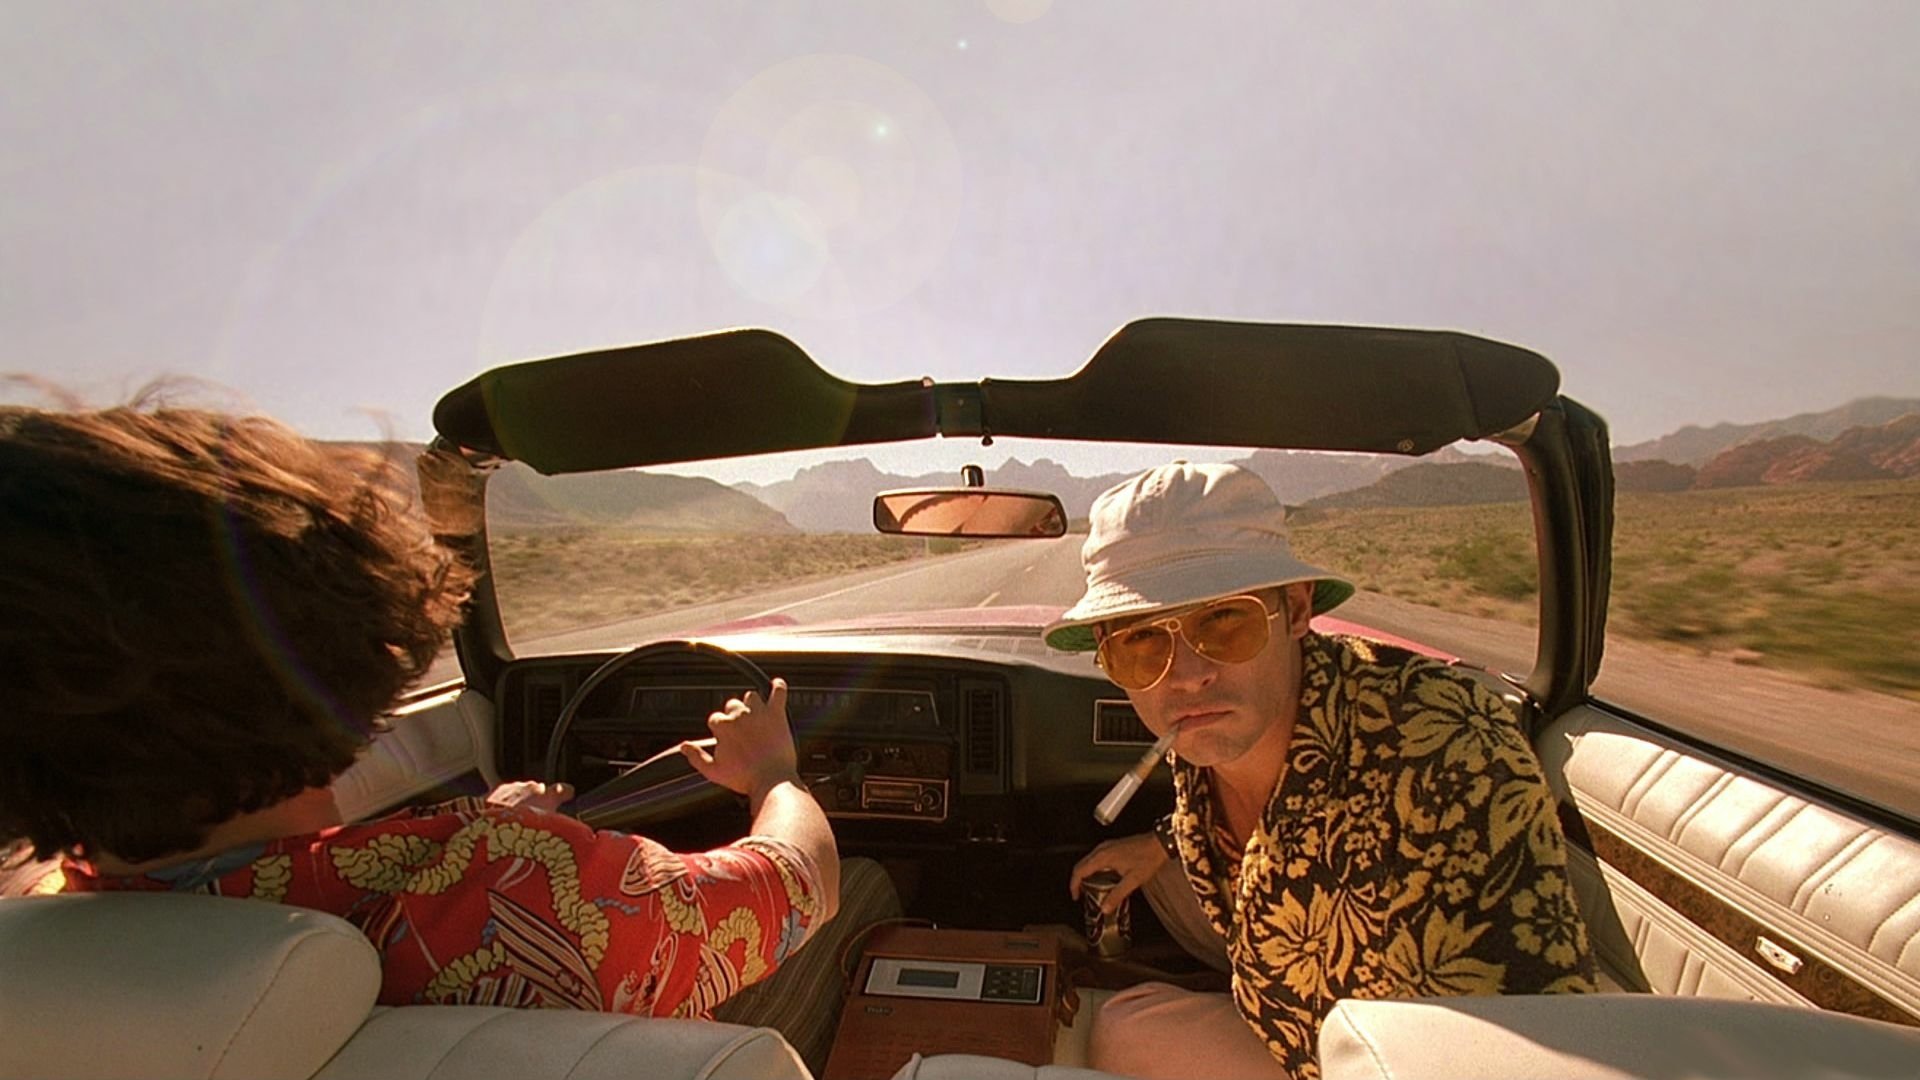 Fear And Loathing In Las Vegas Hd Wallpaper Background Image 1920x1080 Id 645705 Wallpaper Abyss